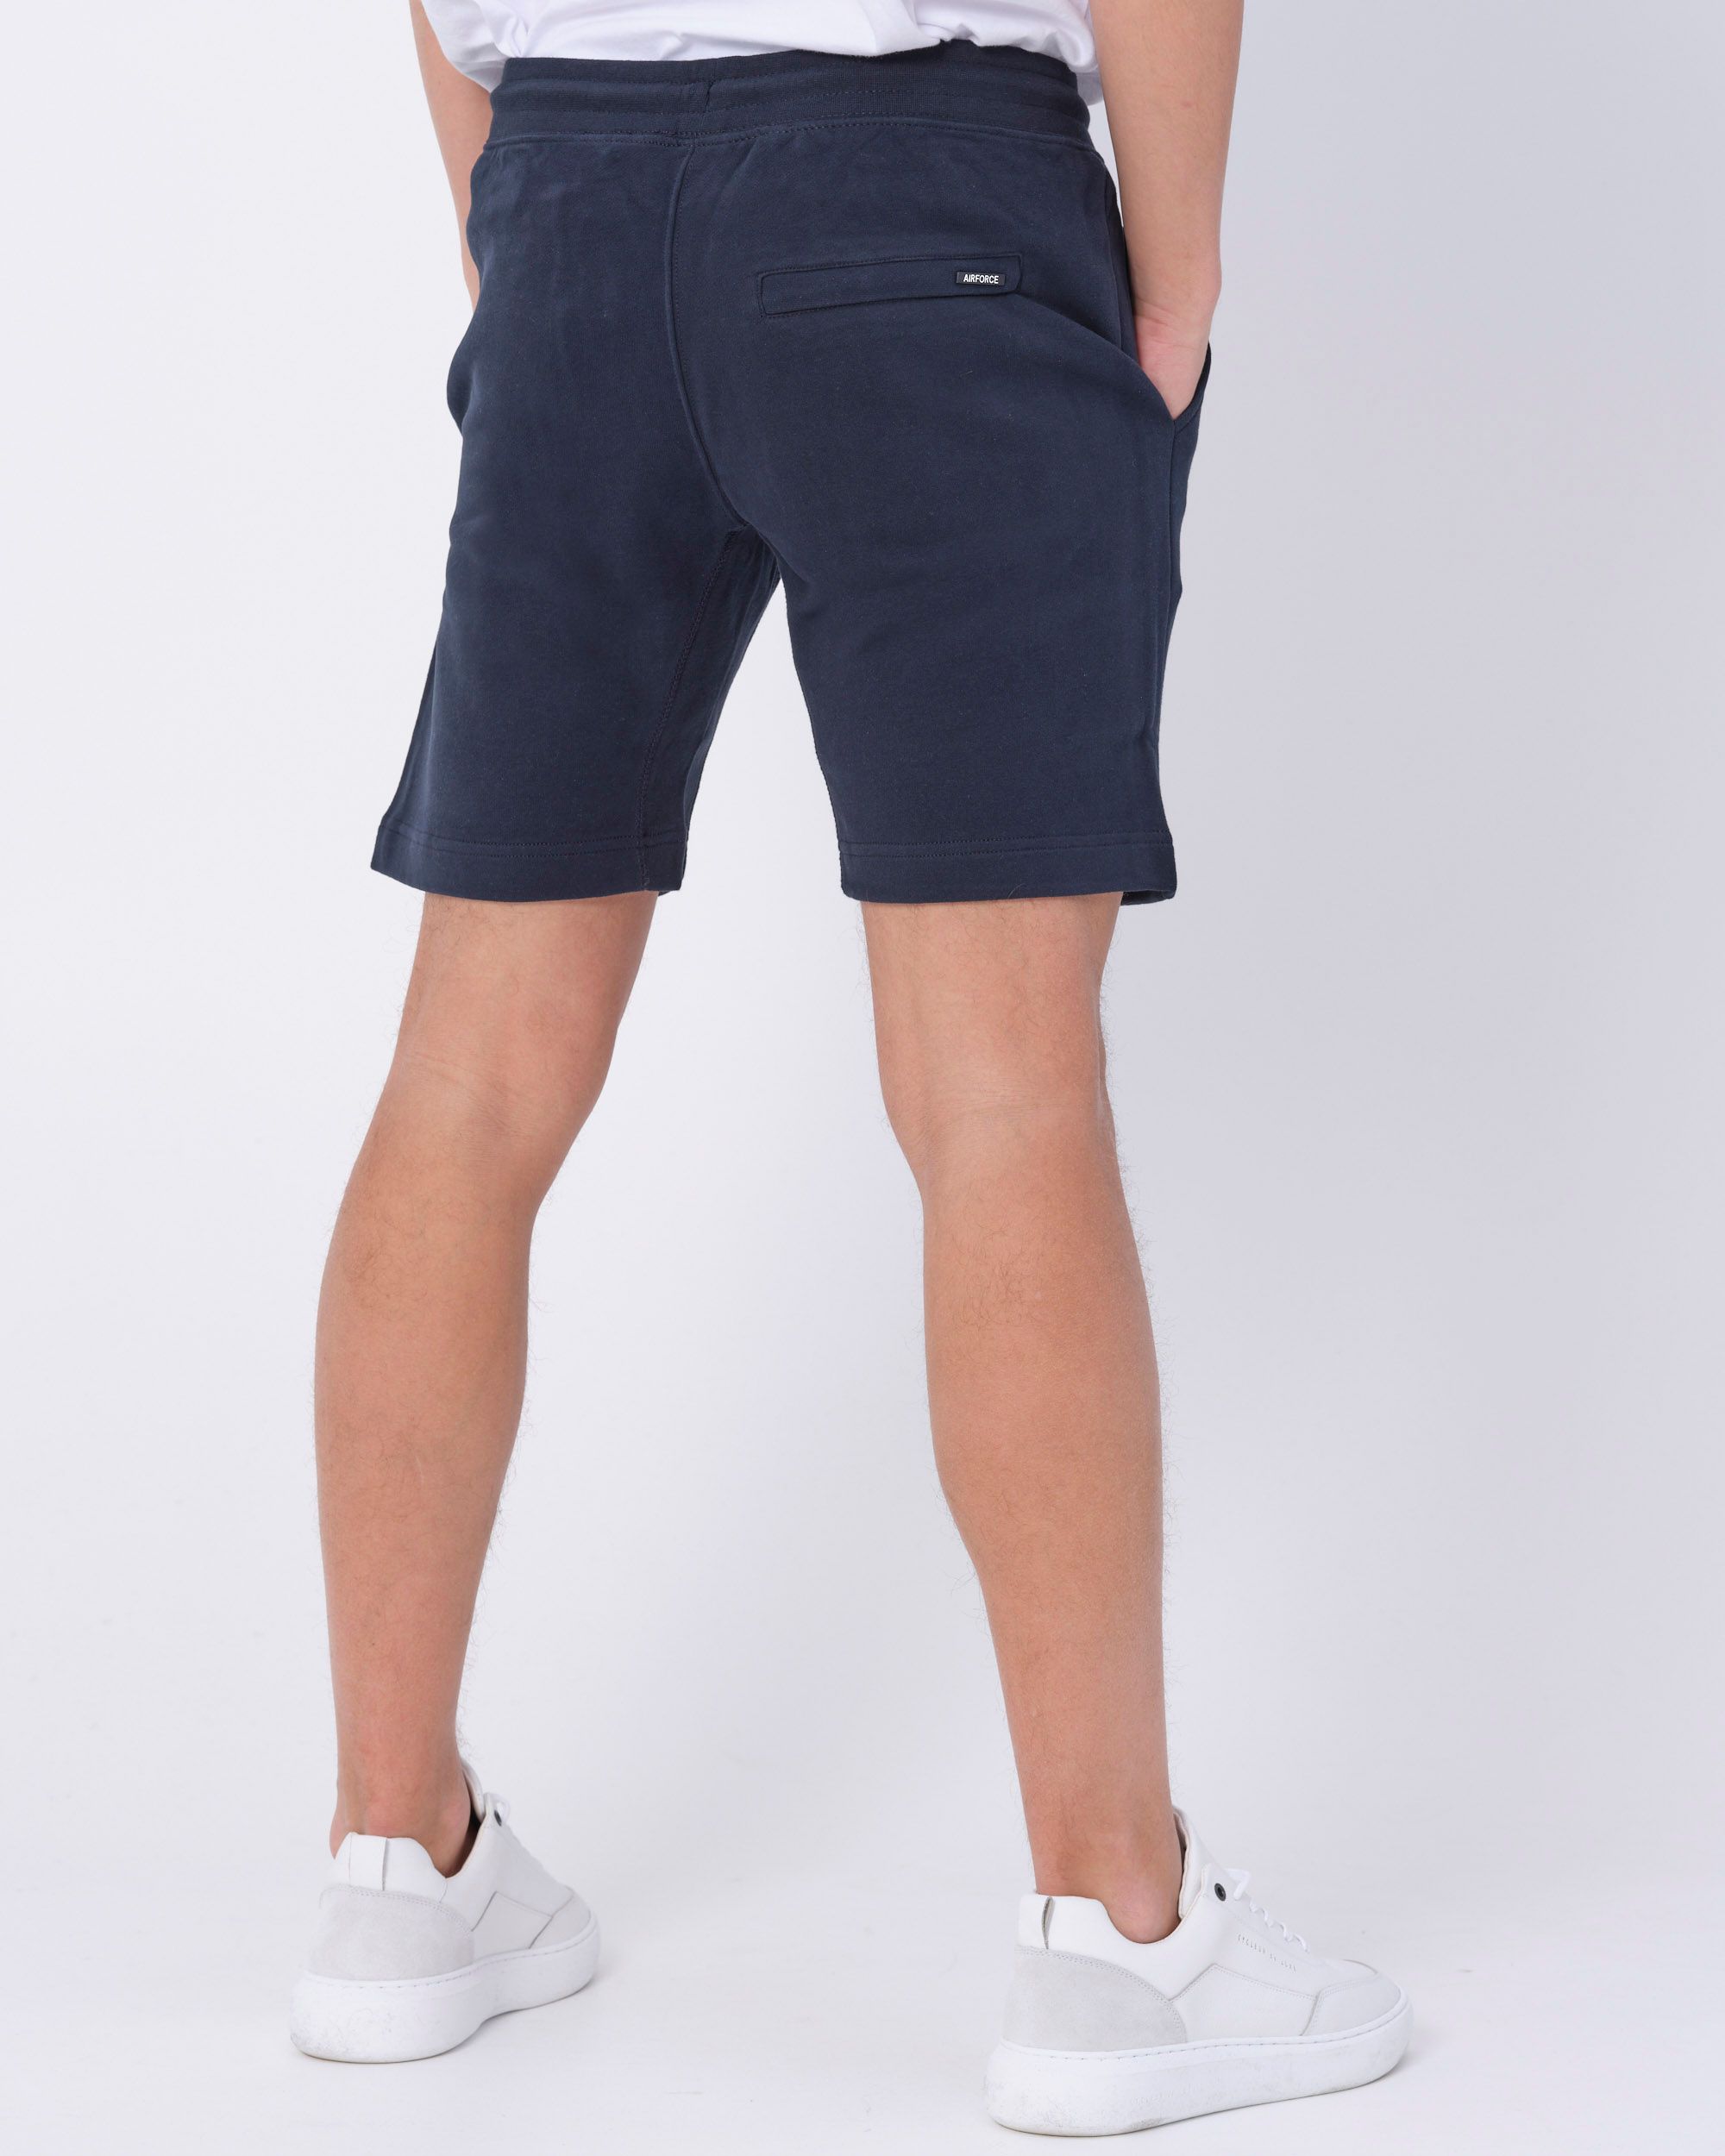 Airforce Jogg Short Donker blauw 083274-001-L